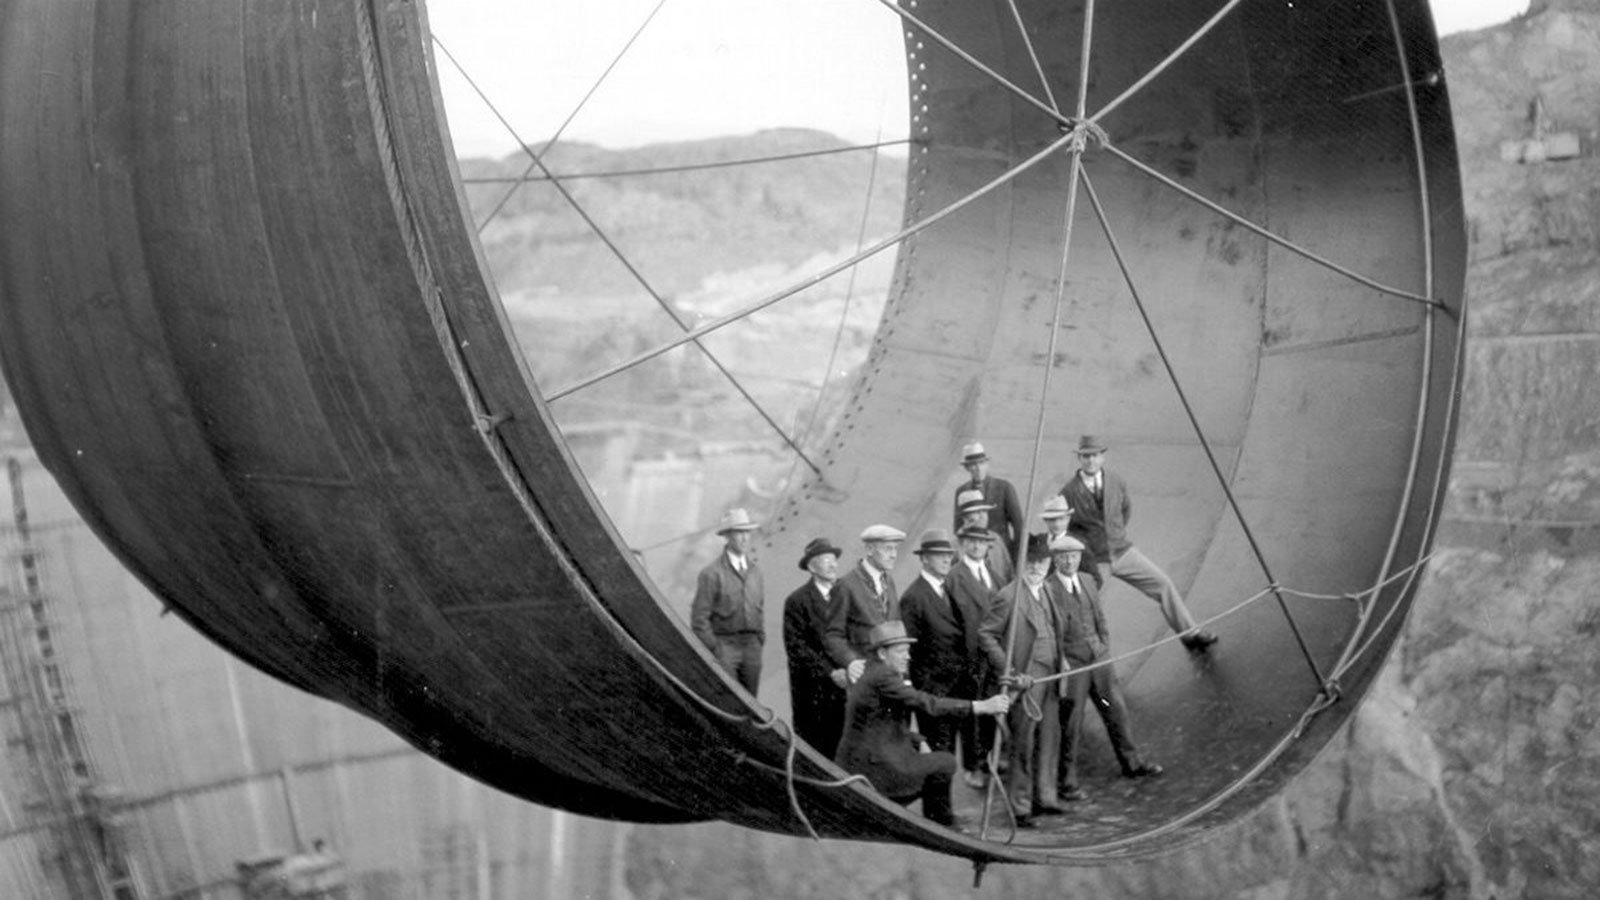 Officials ride in one of the penstock pipes of the soon-to-be-completed Hoover Dam